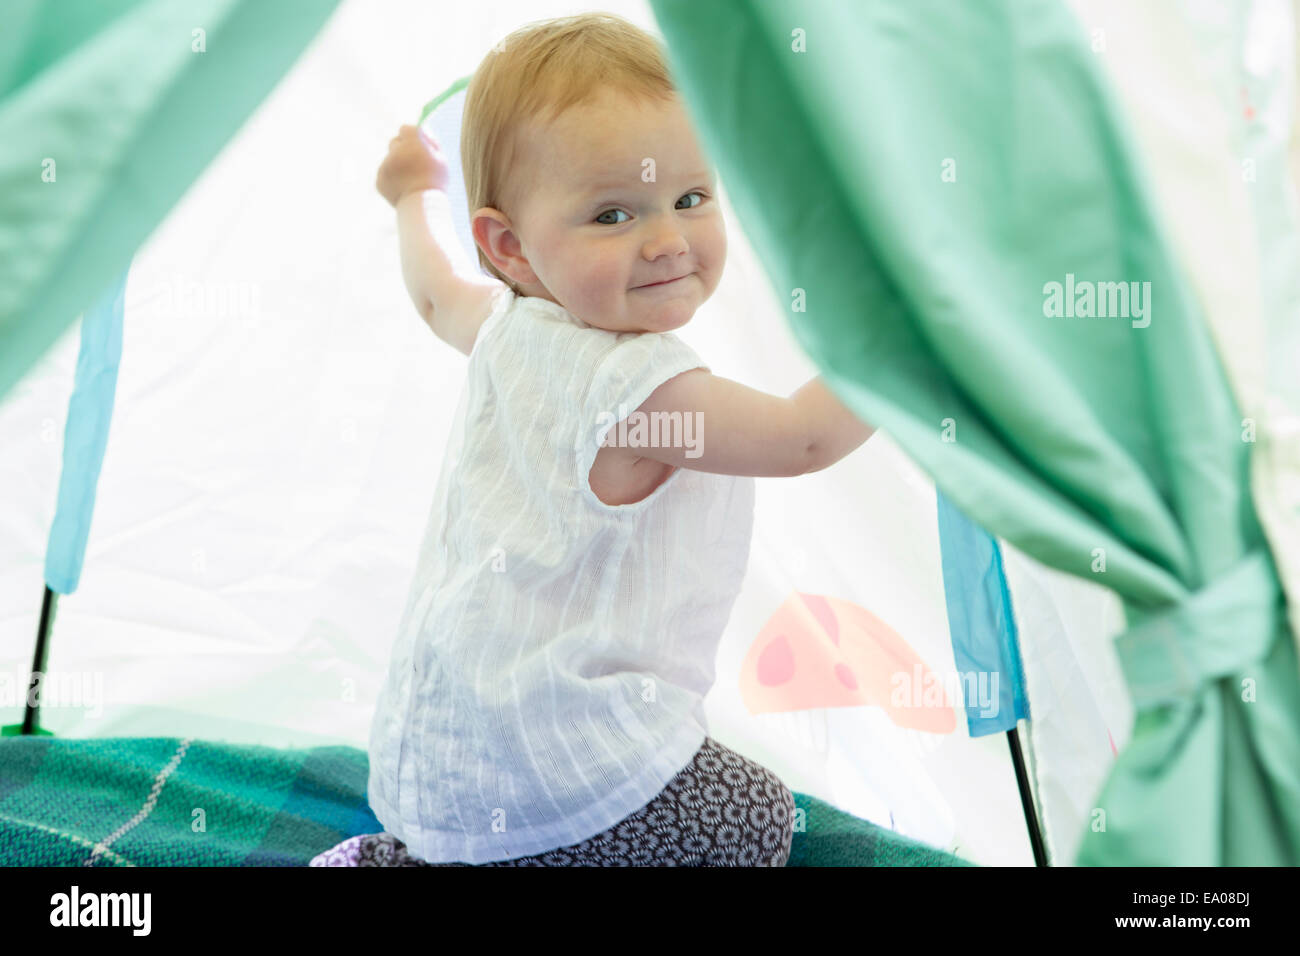 Baby Girl playing in tent Banque D'Images